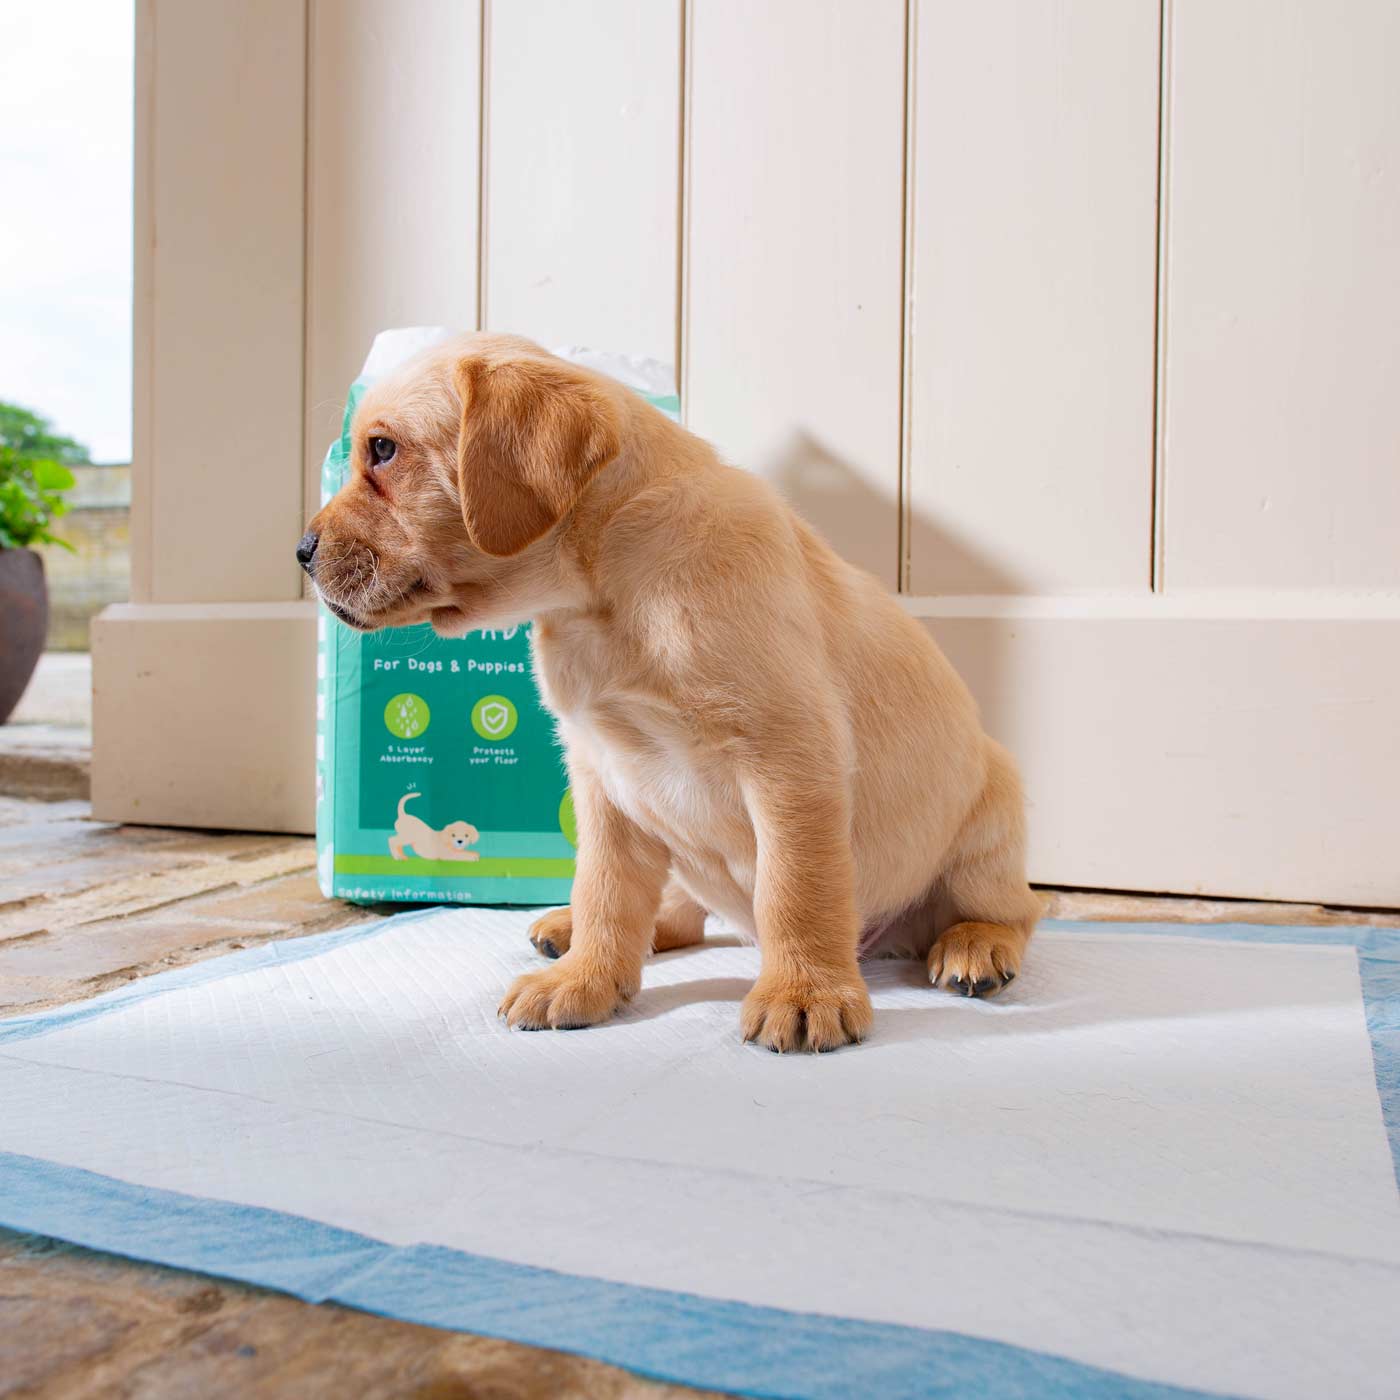 Discover Puppy Training Pads, 50 pads per pack. Featuring Super absorbent with 5 layers absorbency, and Makes house training easy and protects floors. Reducing smelly odours, Perfect for training puppies, travelling, ill or confined dogs. now available at Lords and Labradors